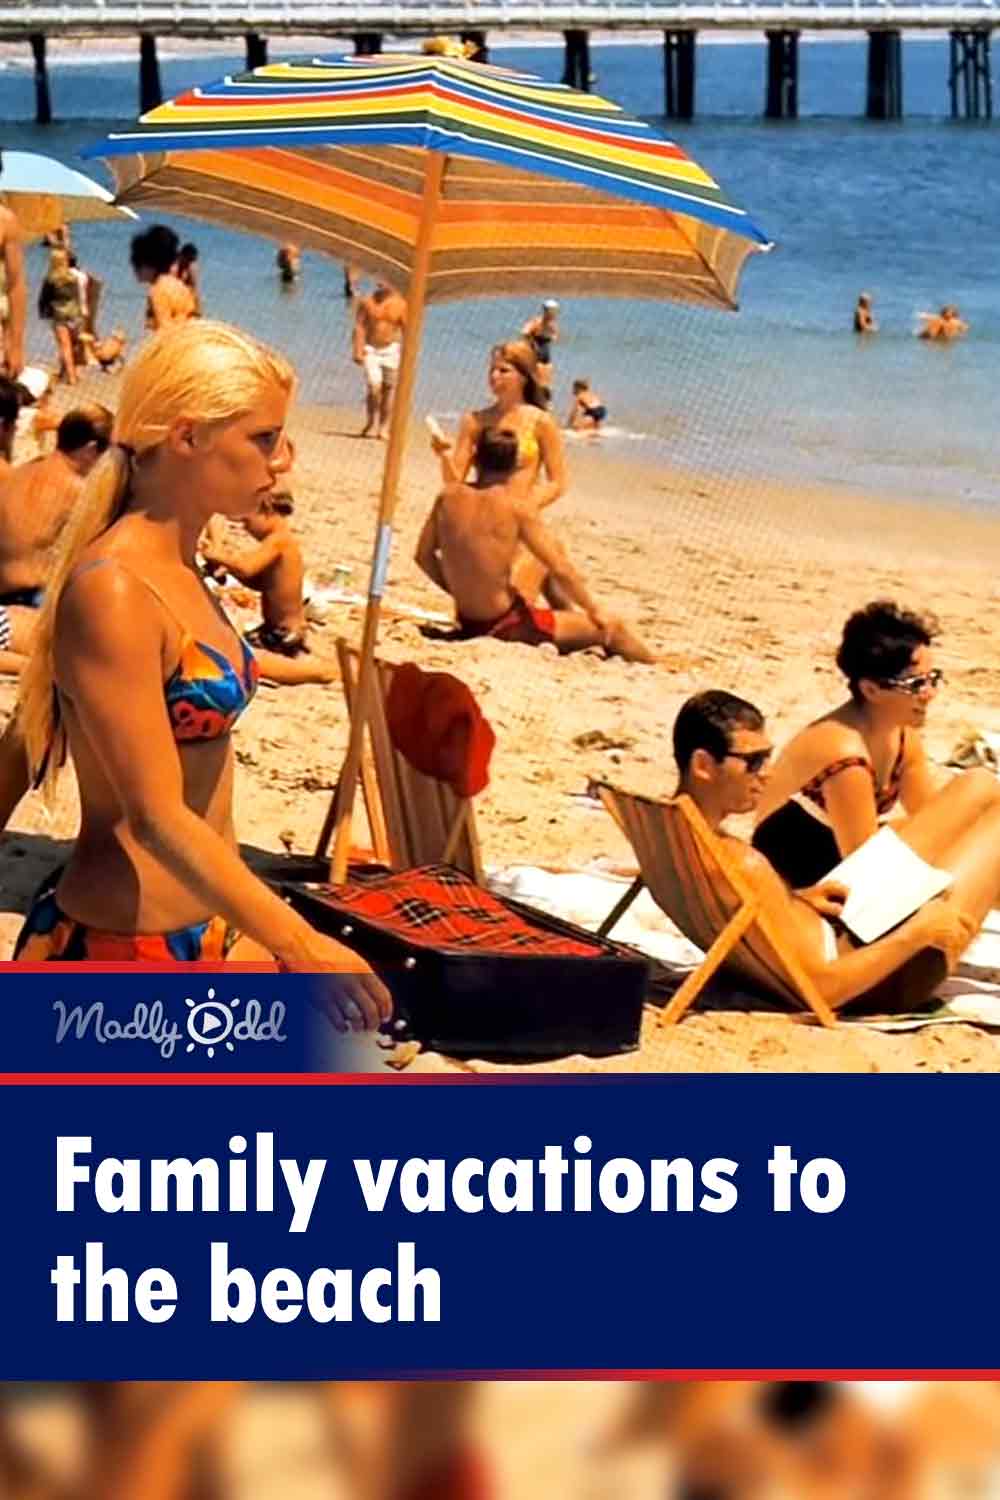 Family vacations to the beach